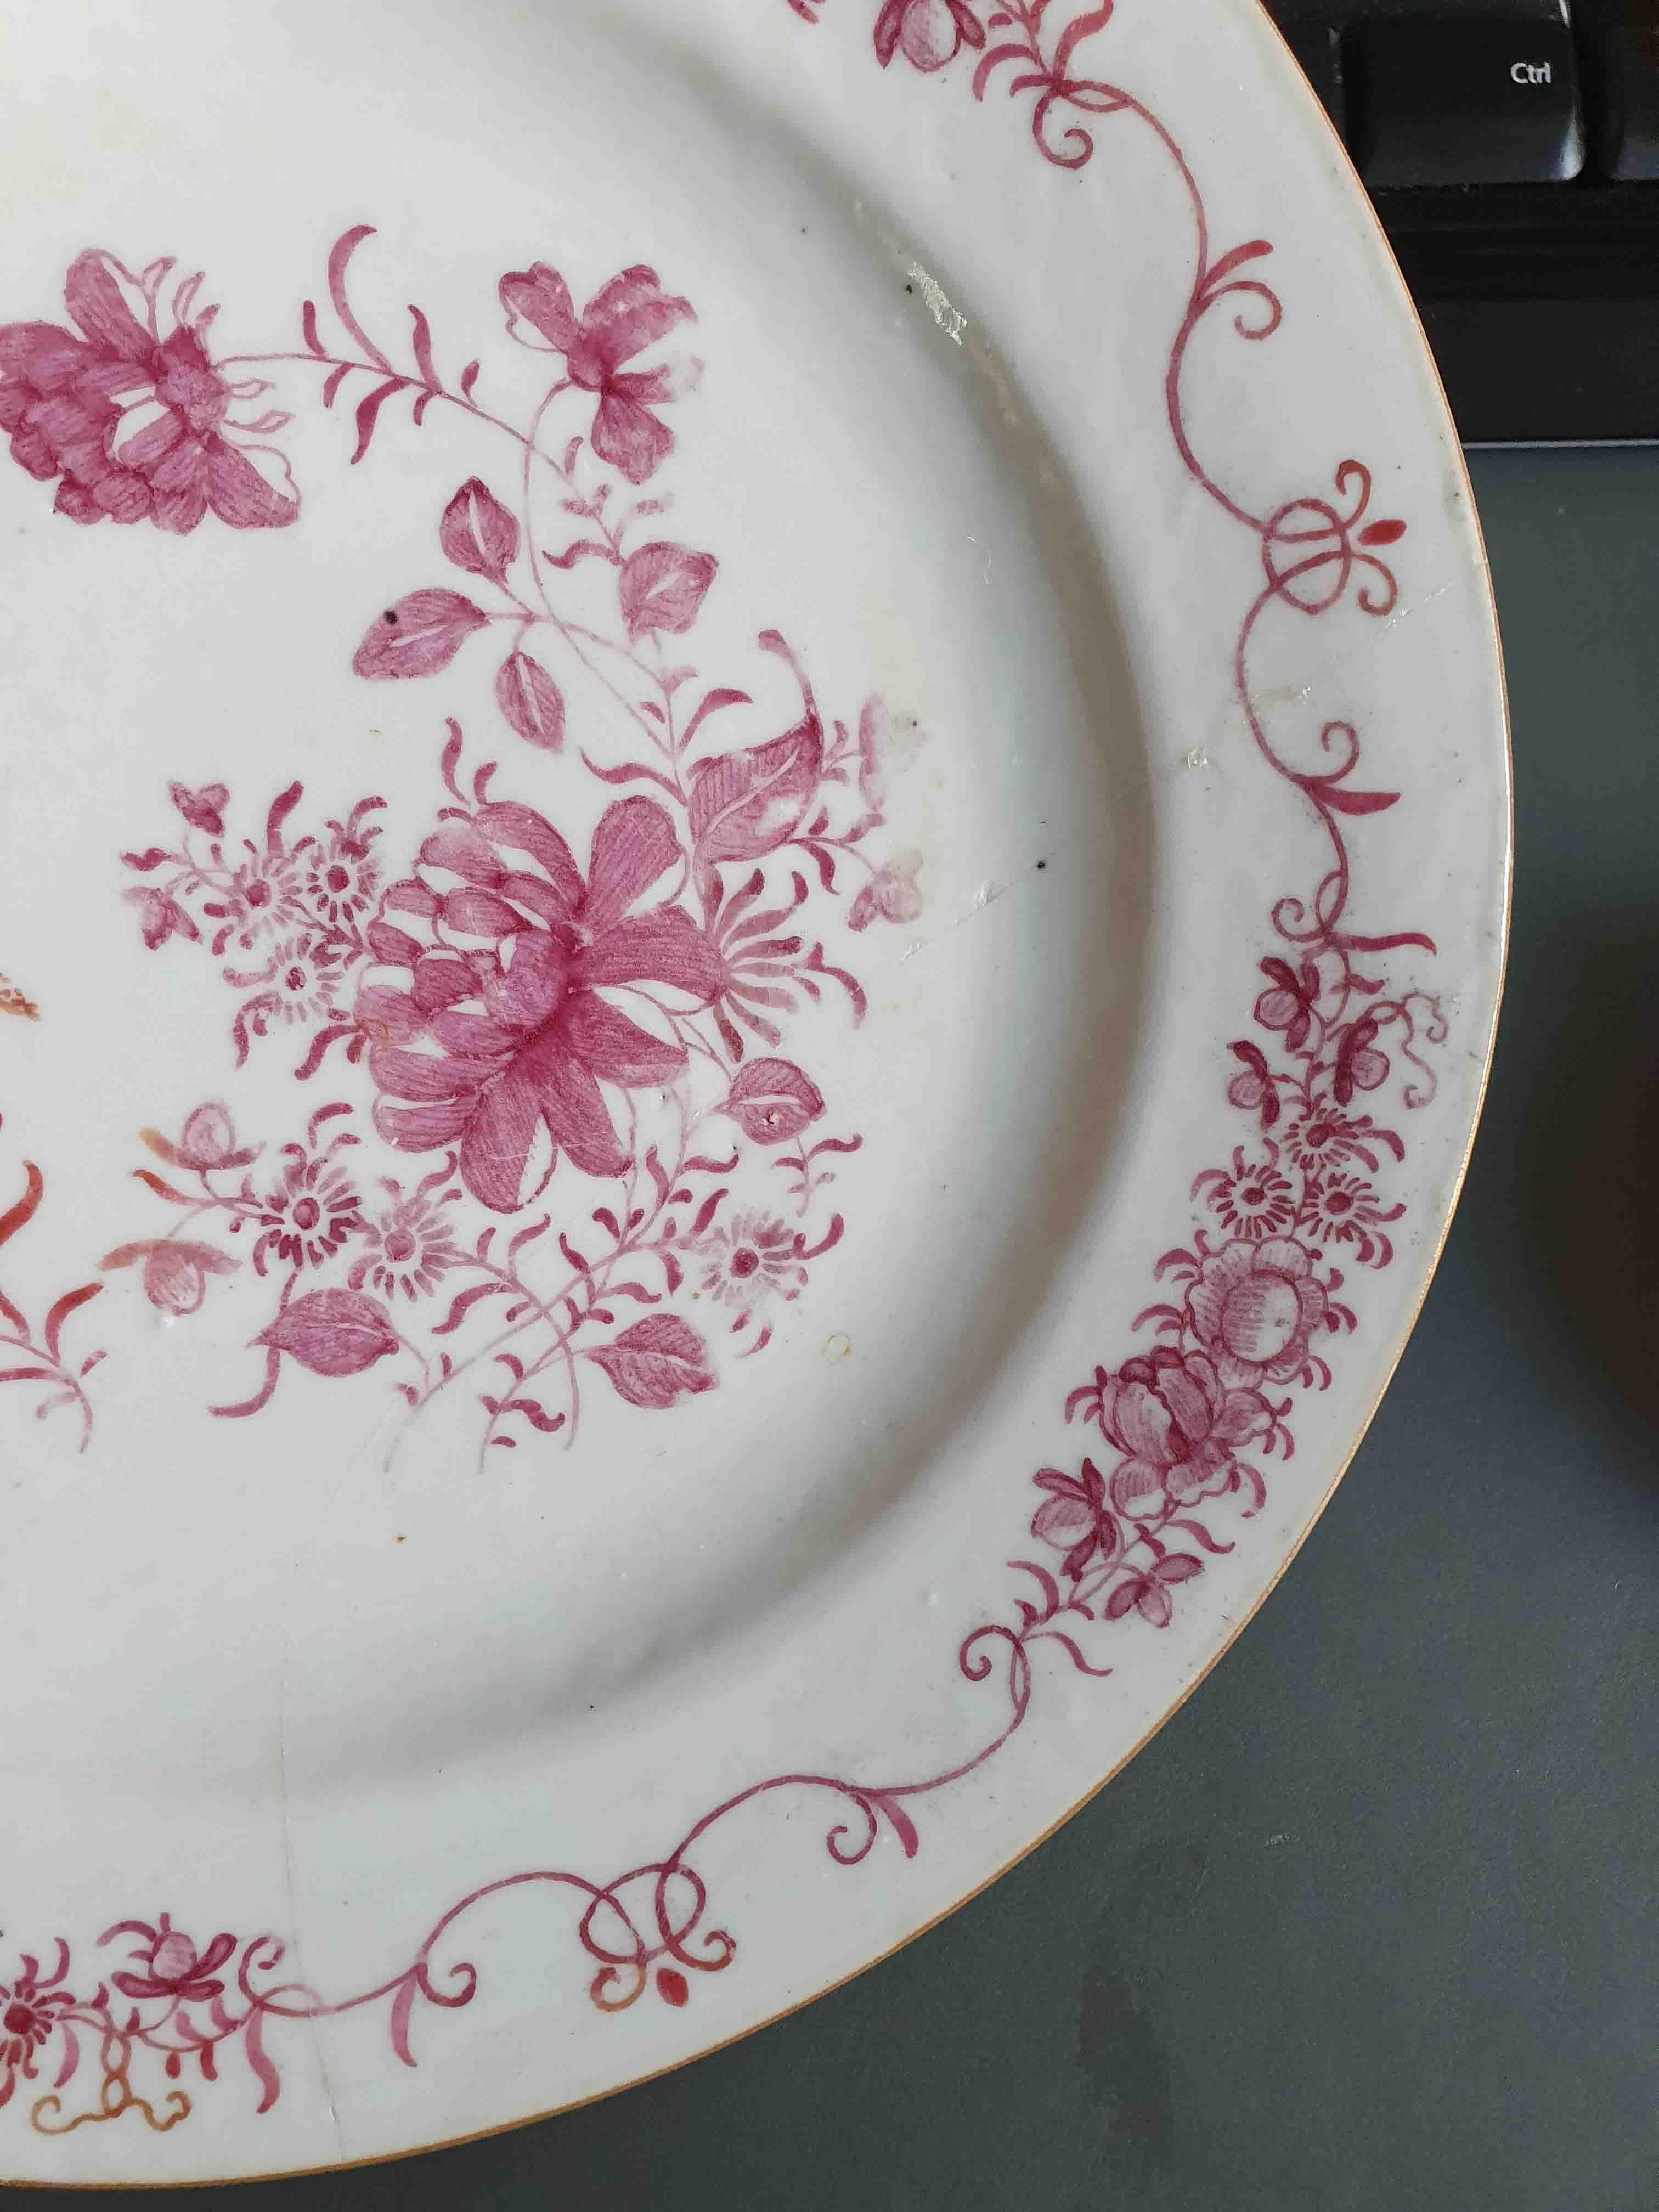 Description

A very nicely decorated set of plates. Dating to circa 1740-1750

A scene with flowers in rose colors.

Condition
Dish 1 restored piece. Dish 2 1 hairline and some chips/frits to rim. Dish 3 some small chips/frits and crackle